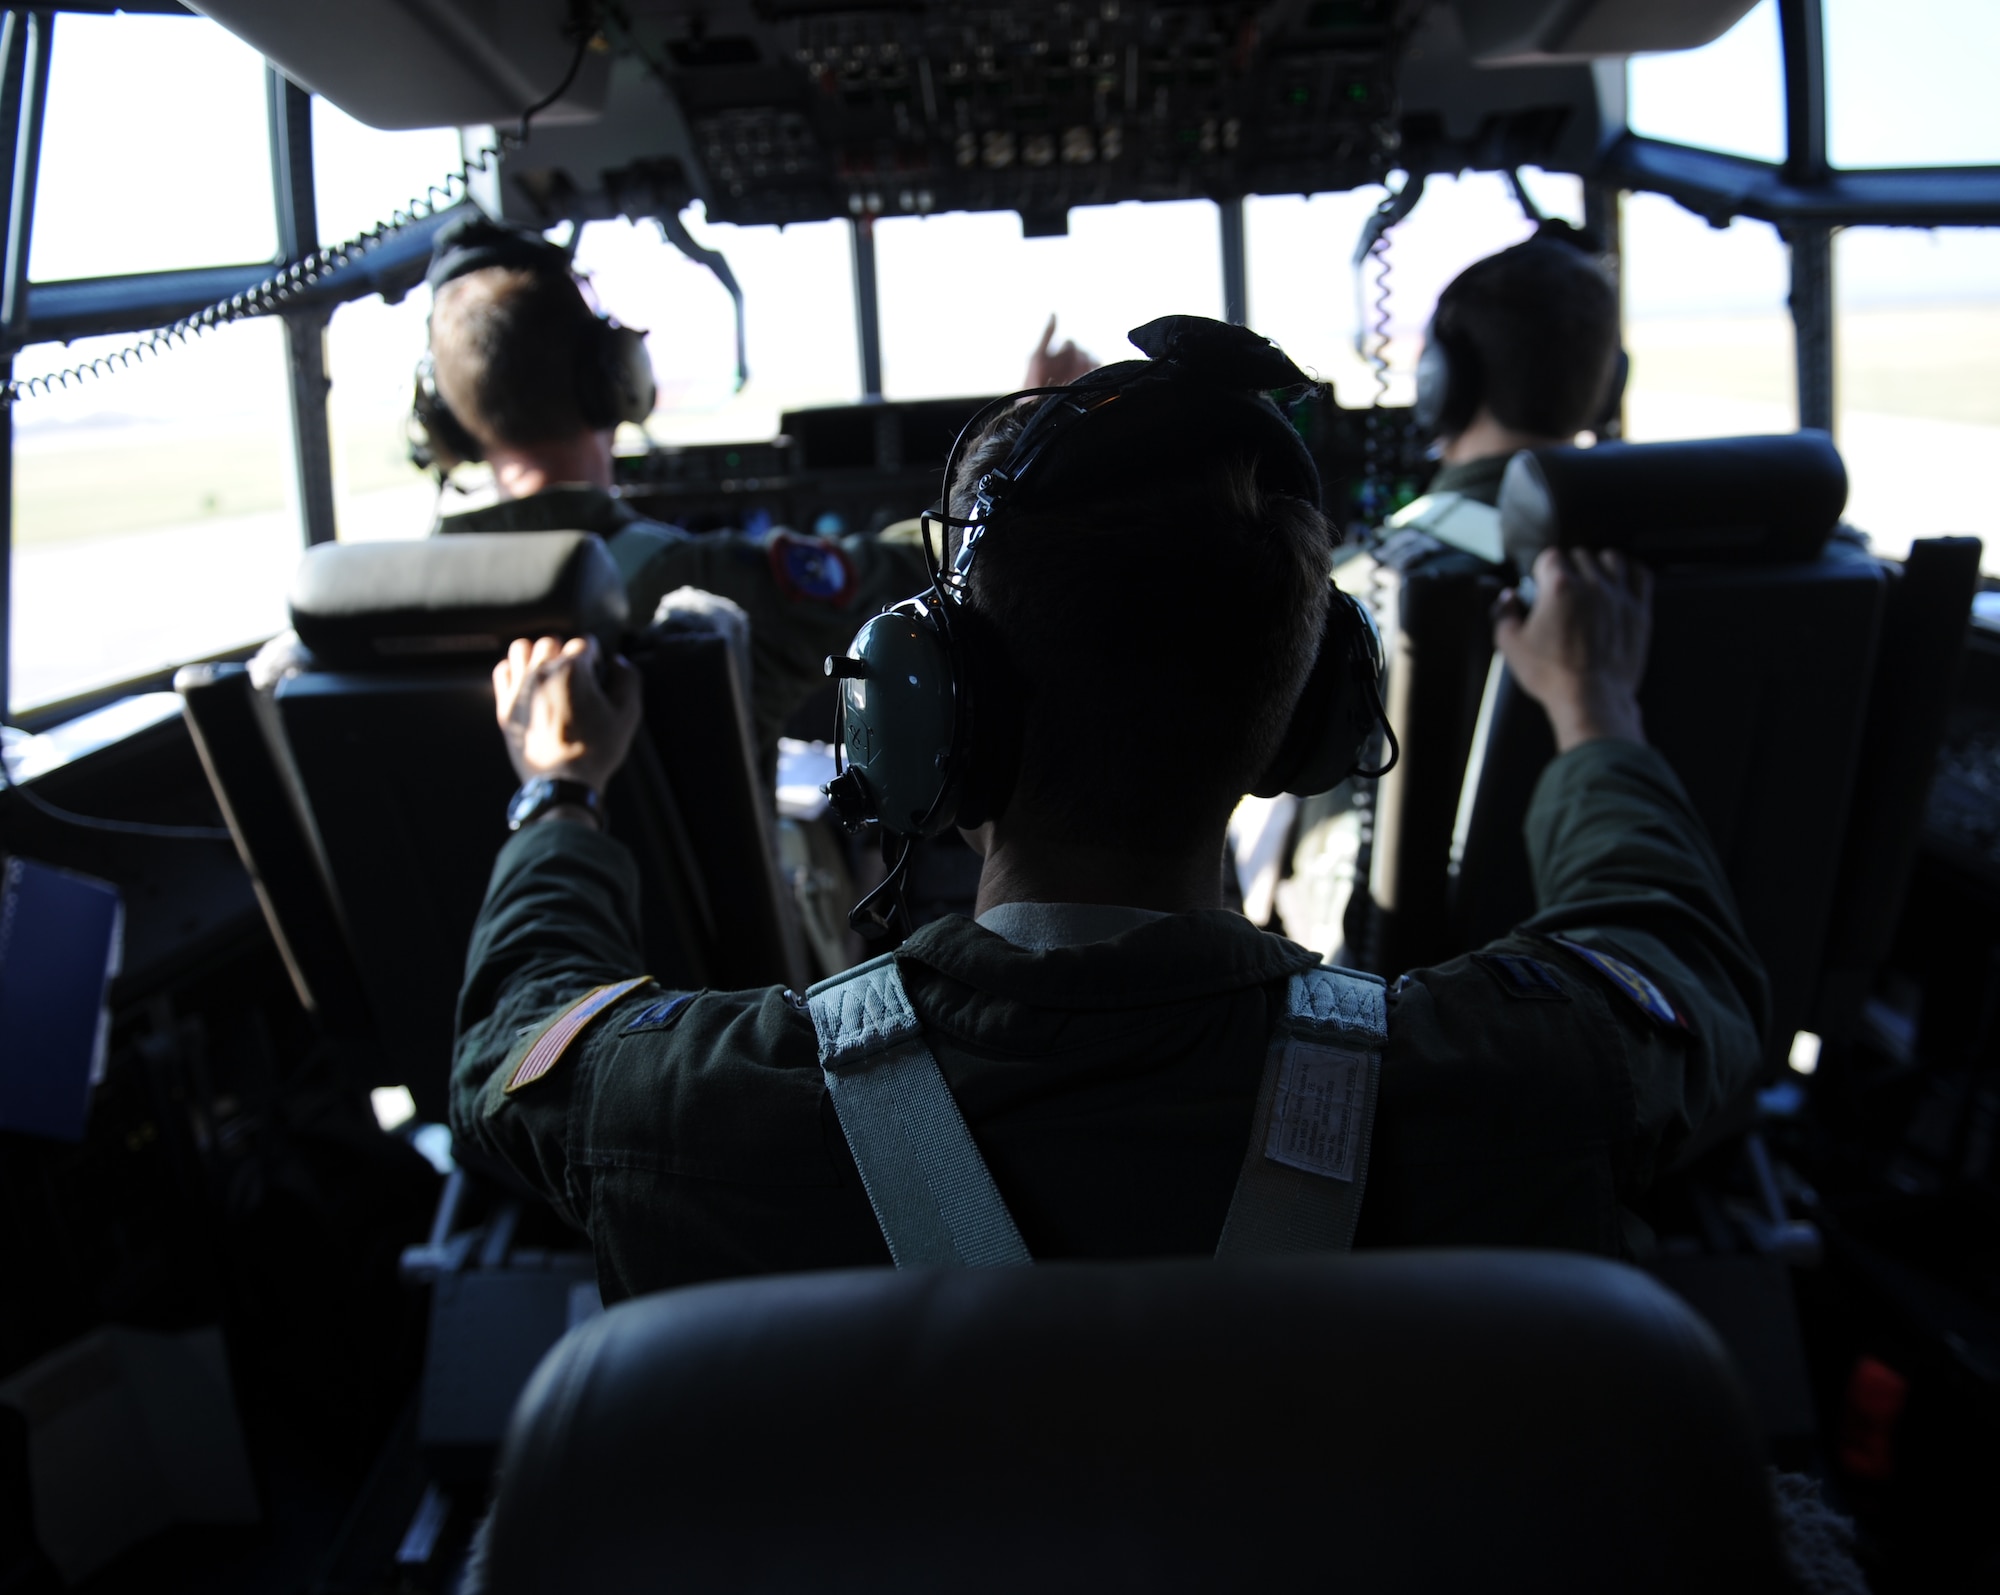 U.S. Air Force pilots prepare for takeoff in a C-130J Super Hercules July 23, 2014, at Dyess Air Force Base, Texas. Two 317th Airlift Group C-130Js successfully employed air-to-air tactics against an F-16 Fighting Falcon during a training exercise en route to Naval Air Station Joint Reserve Base Fort Worth, Texas. (U.S. Air Force photo by Airman 1st Class Kedesha Pennant/Released)